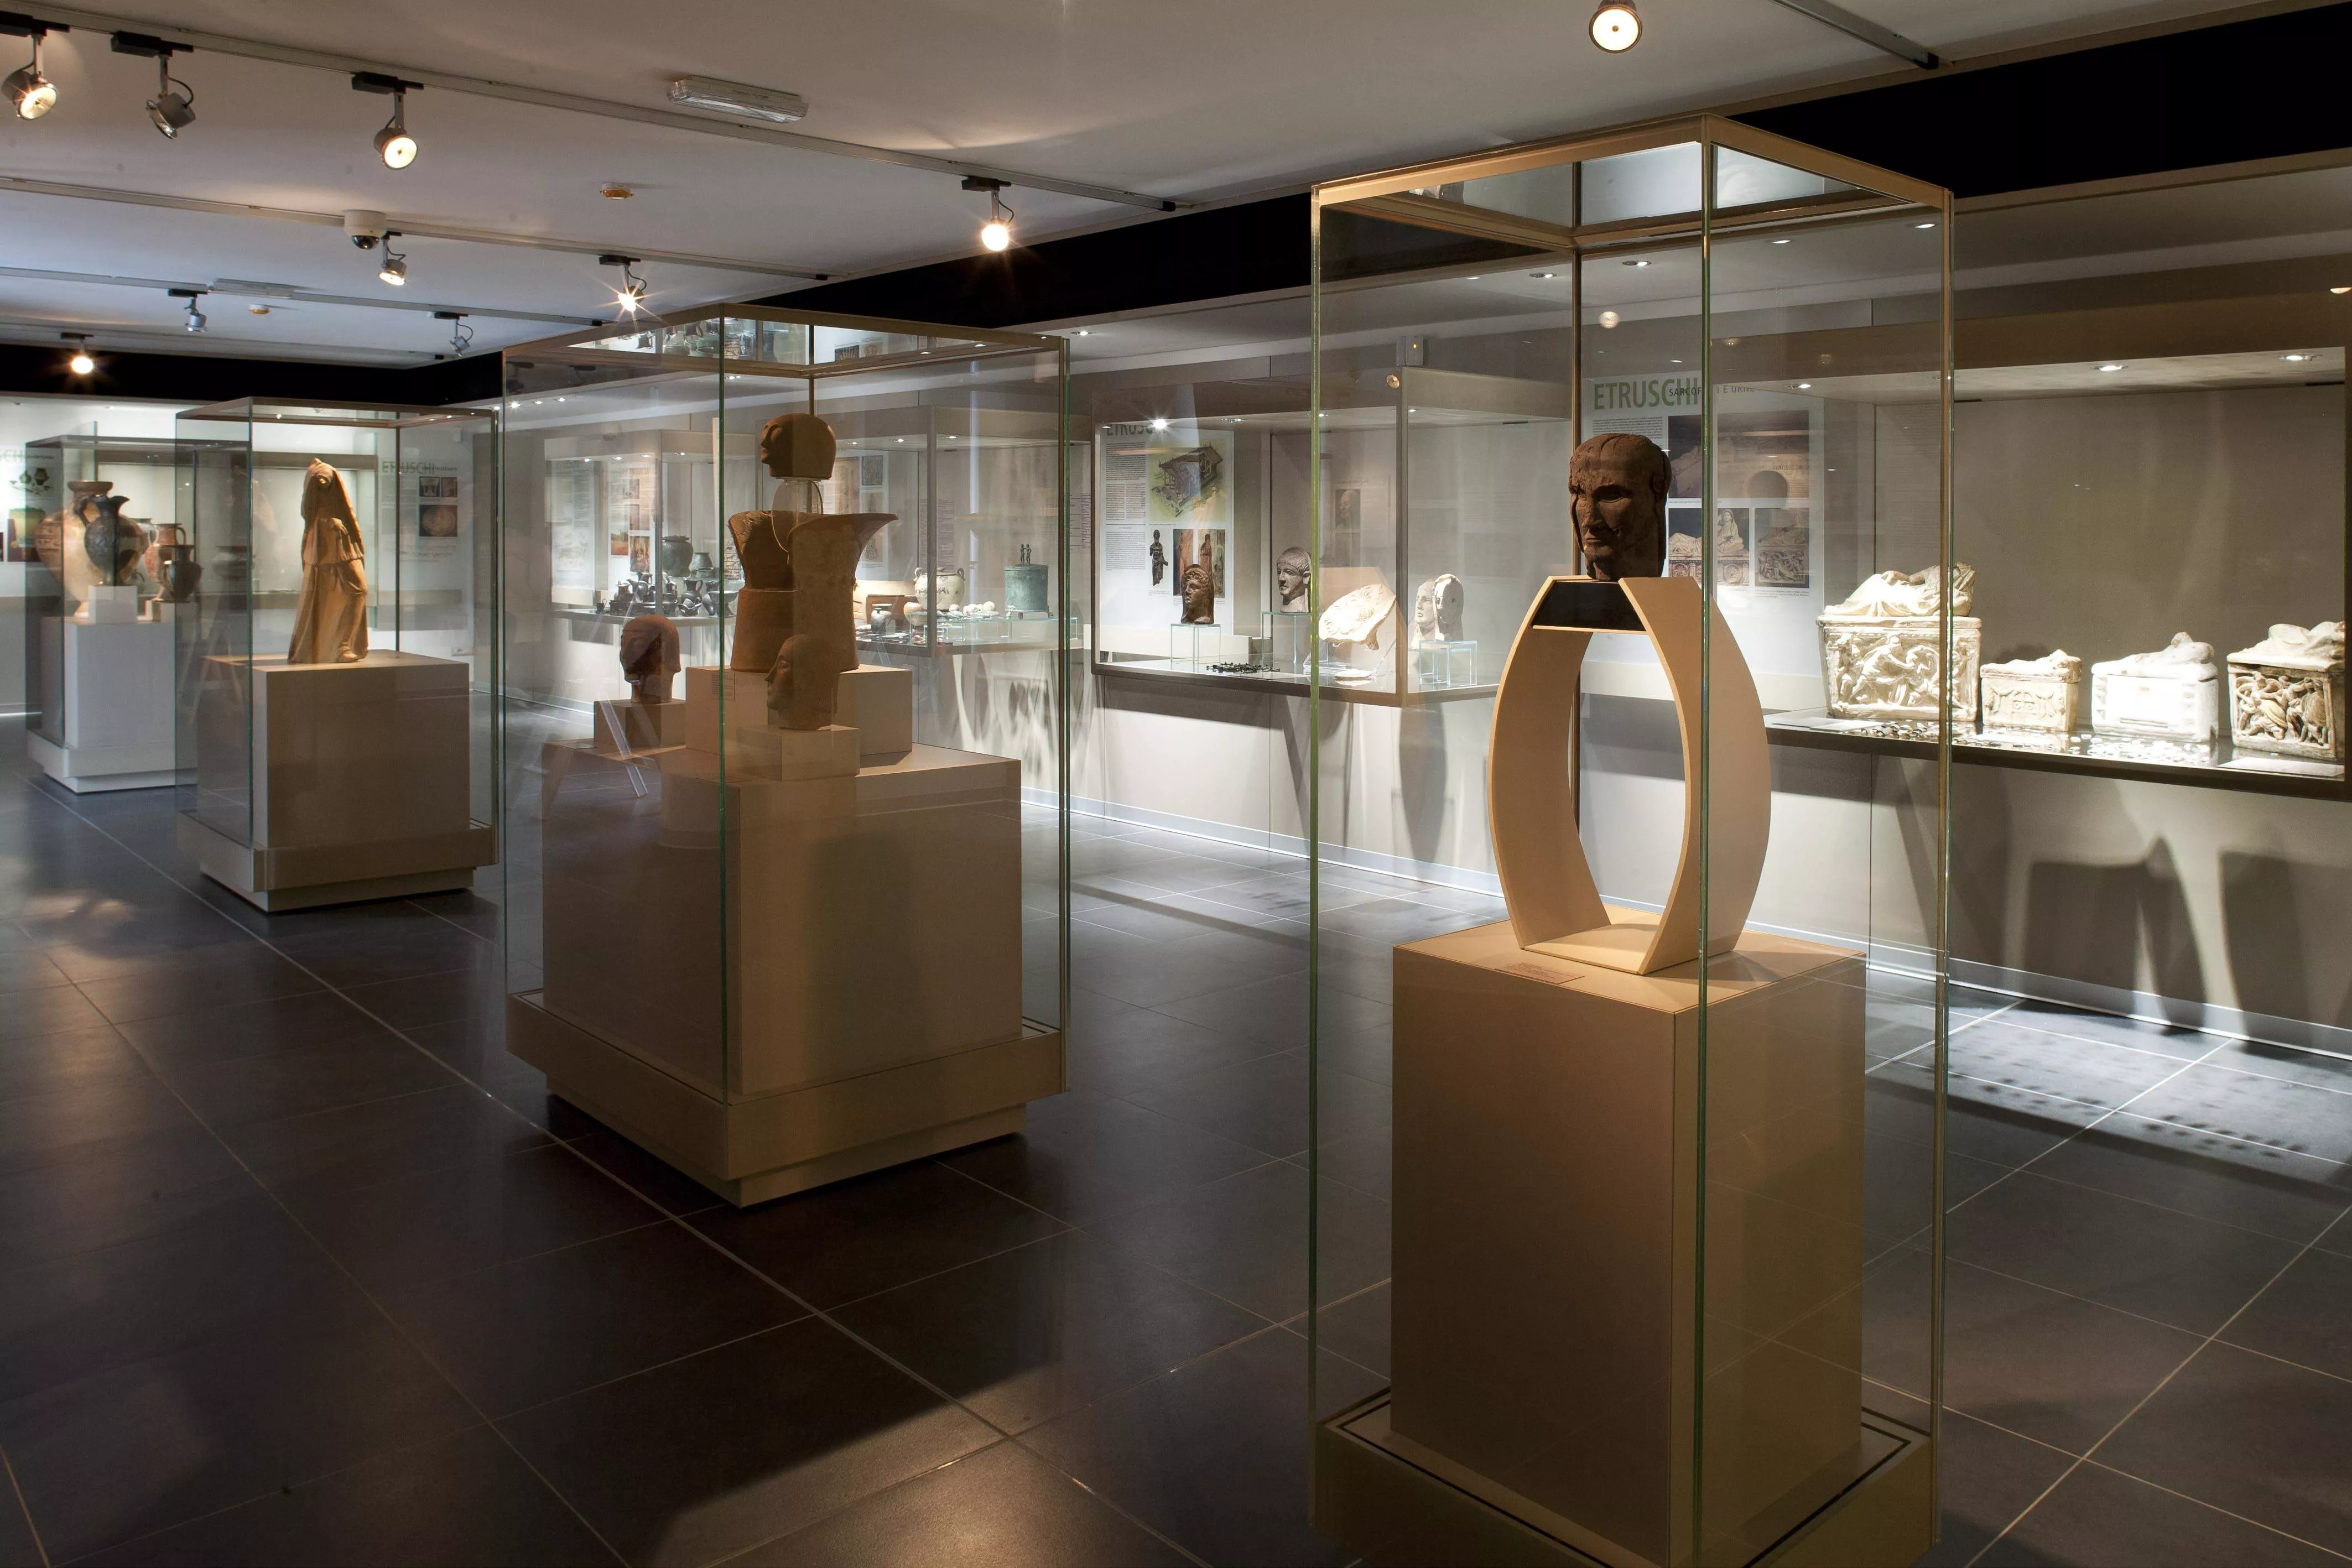 Civic Archaeological Museum in Italy, Europe | Museums - Rated 3.5